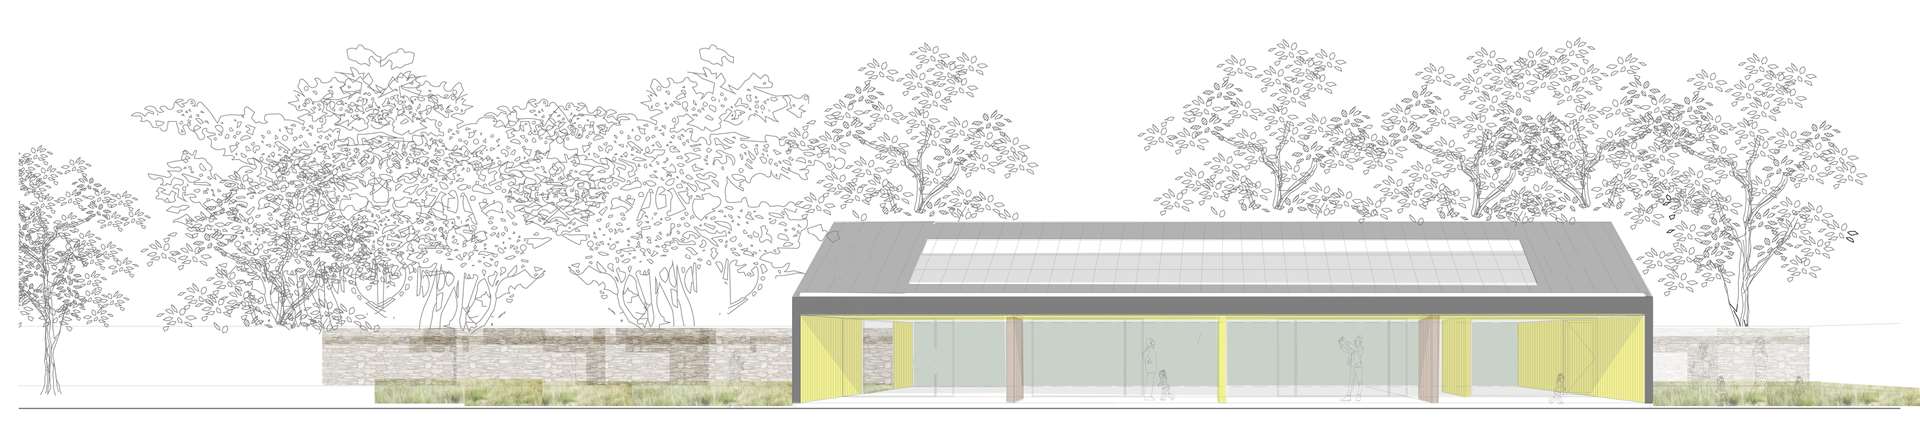 Northern Meeting Park’s proposed new pavilion.